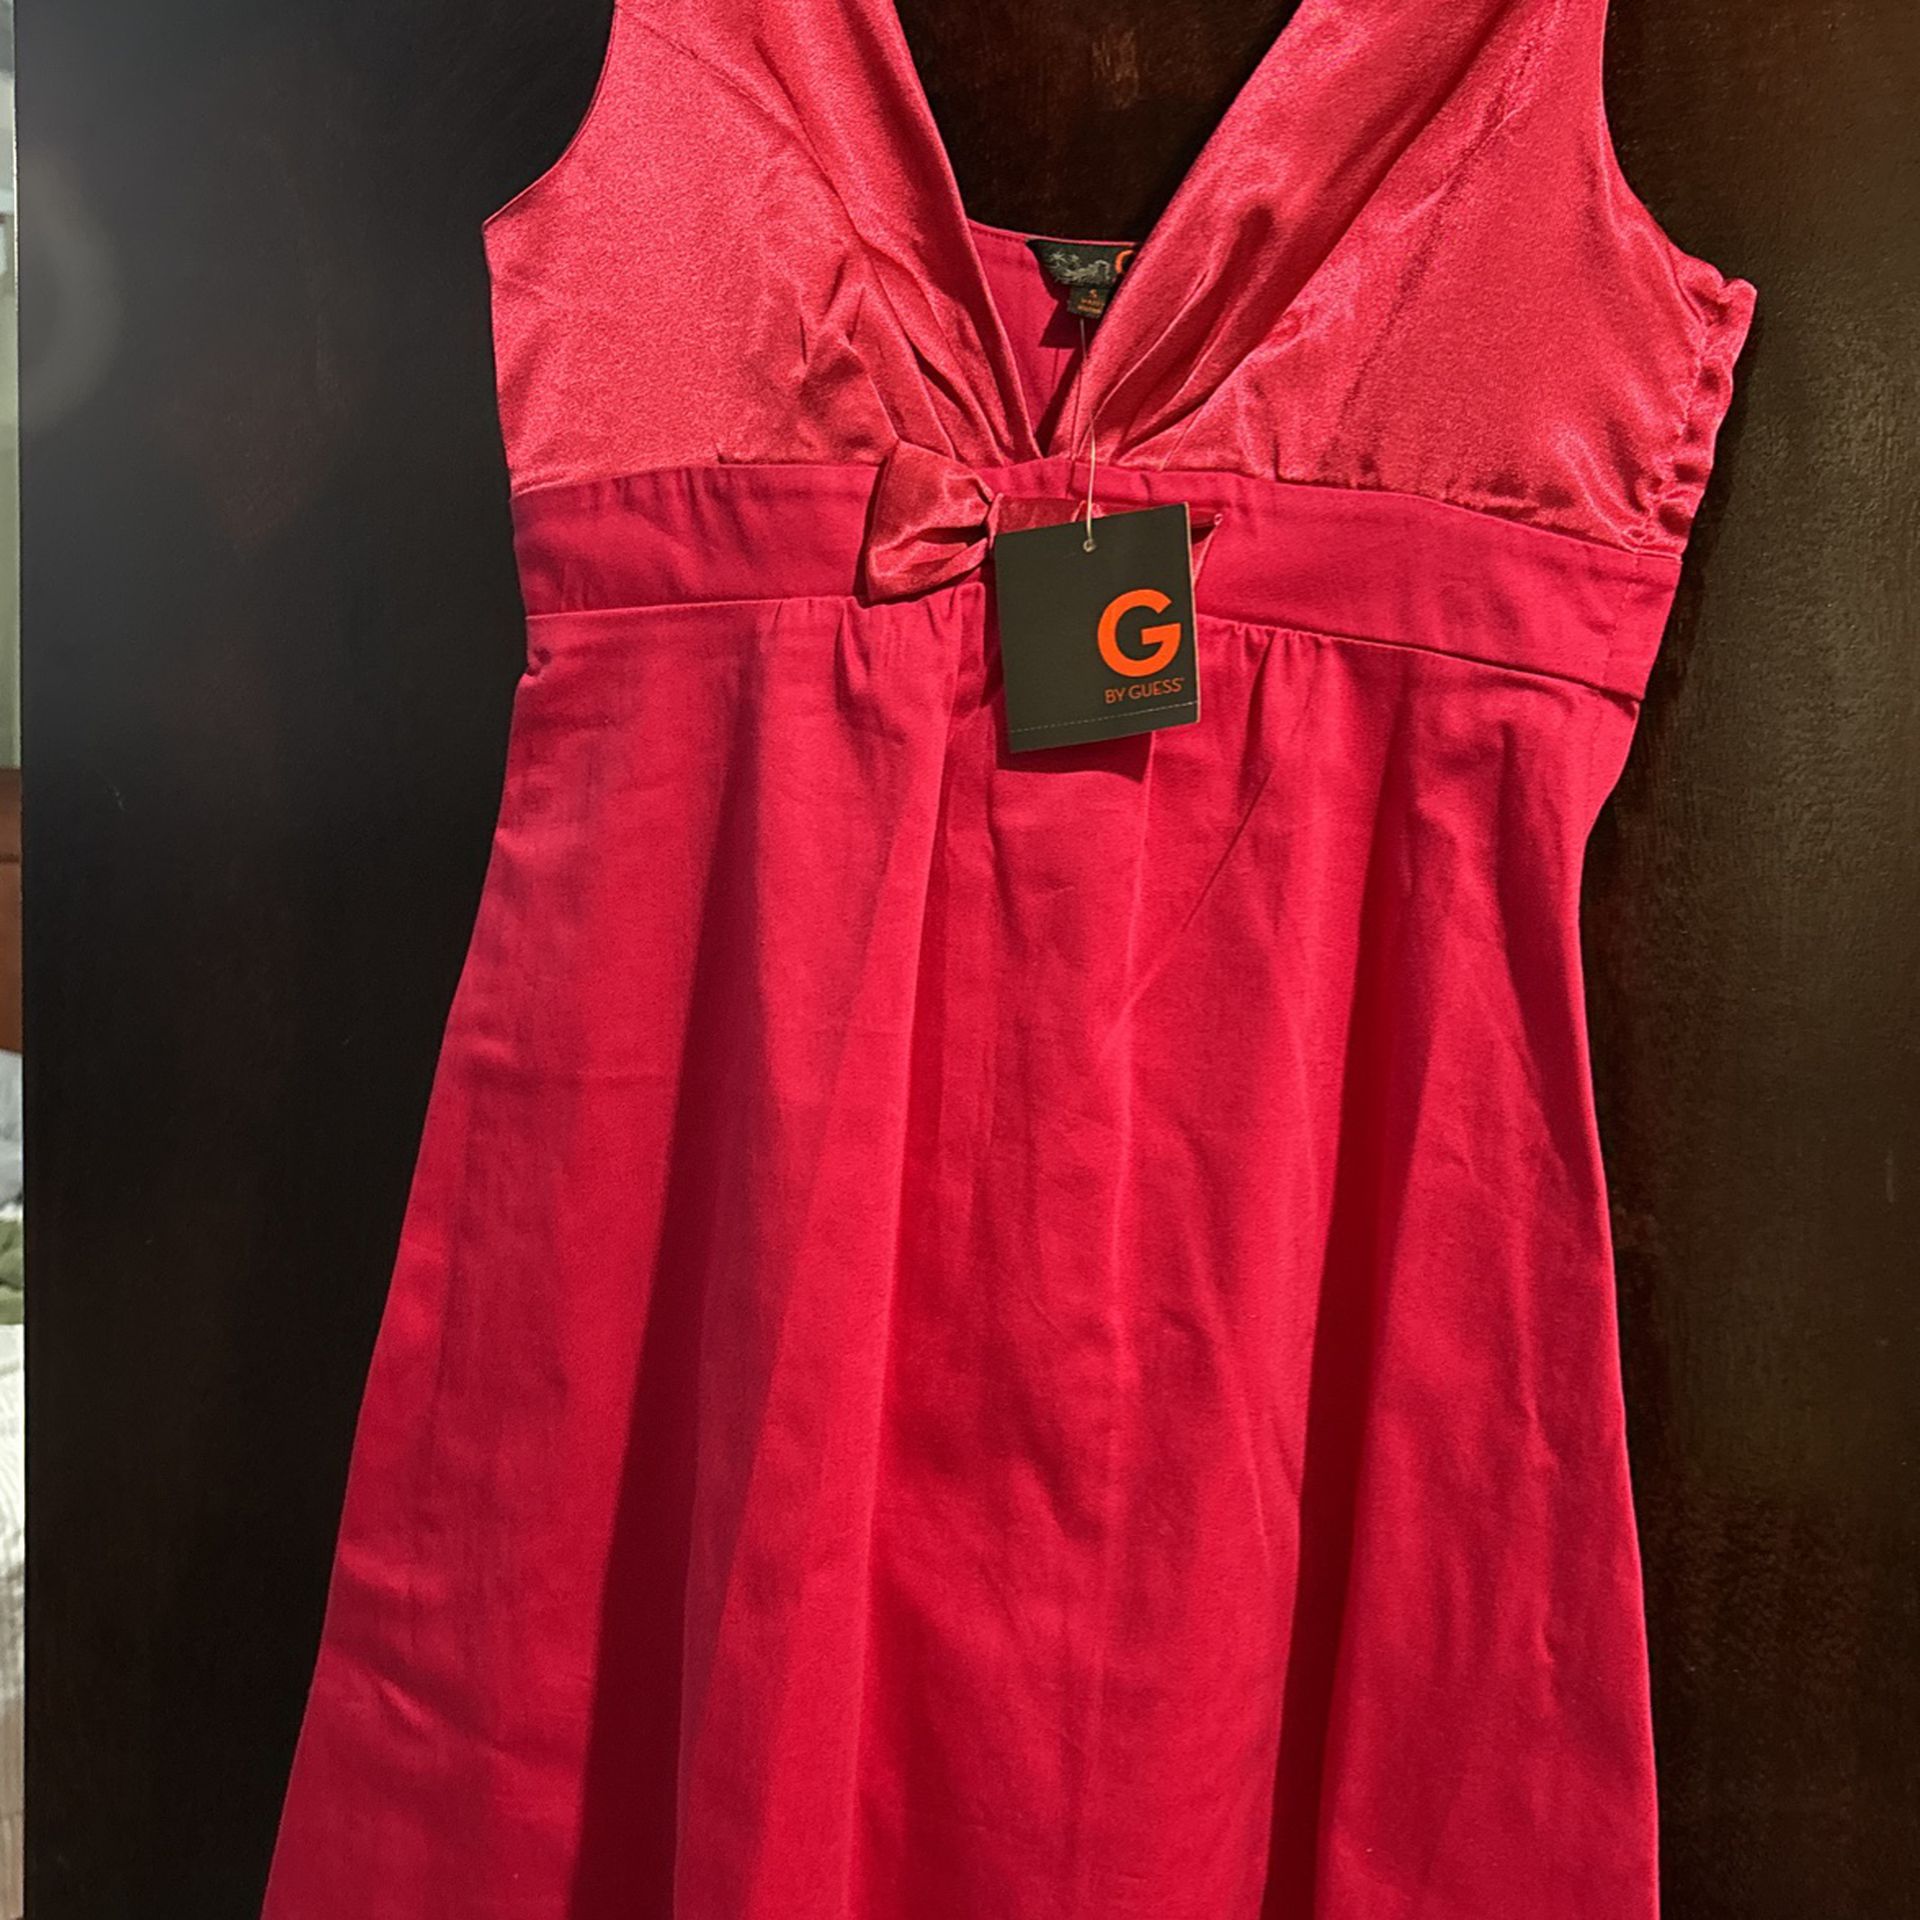 Ladies Dress- BY GUESS- Candor Apple Pink- $12